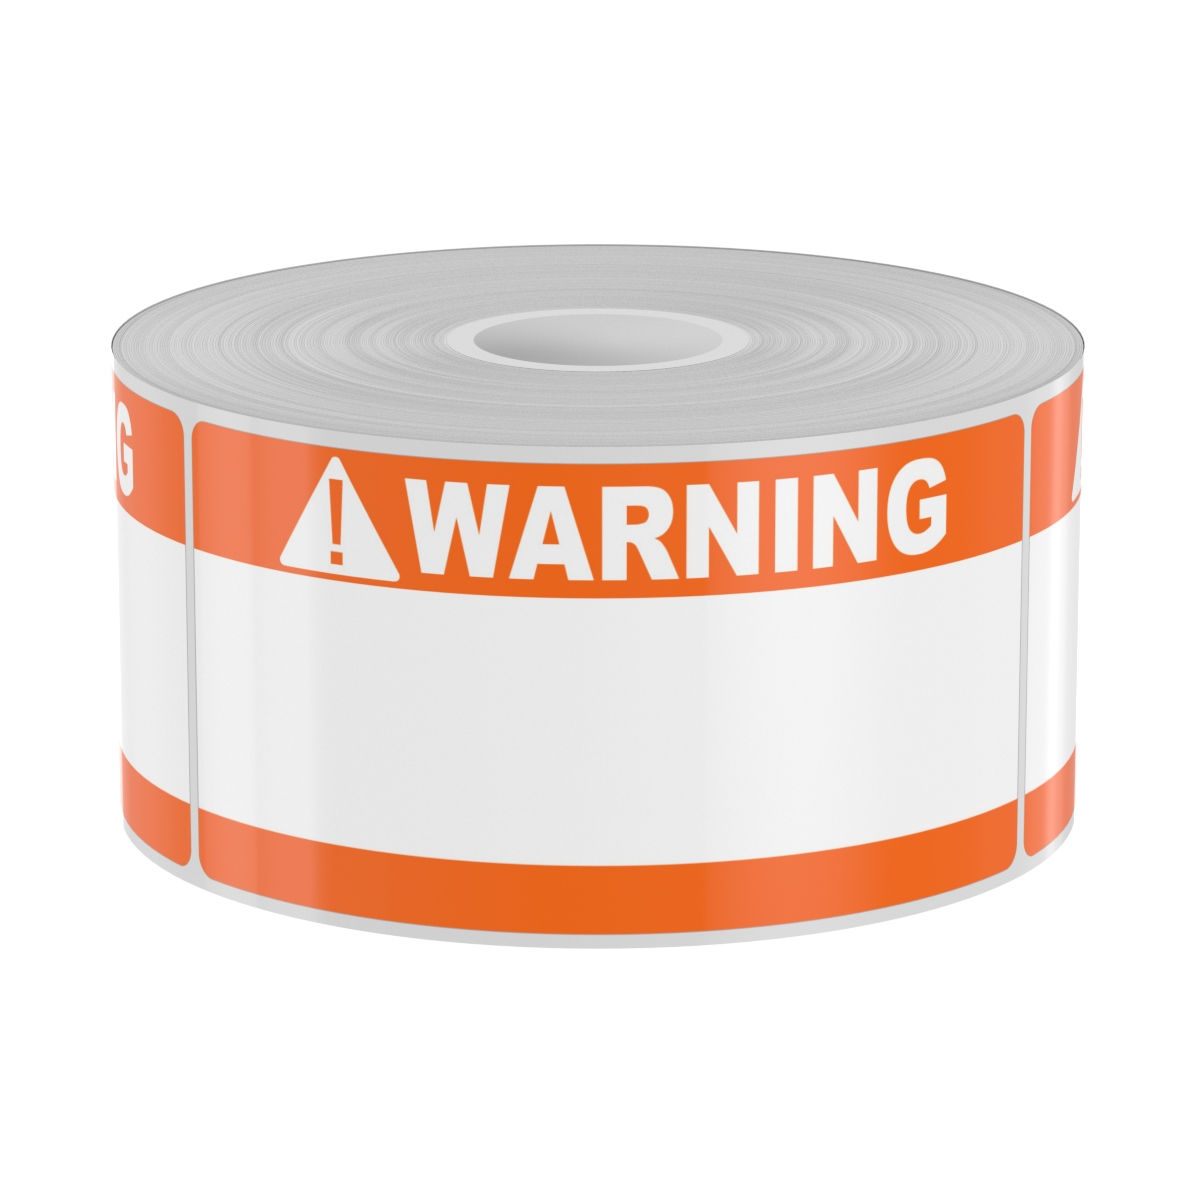 250 2in x 4in High-Performance Die-Cut Orange Double Band with White Warning